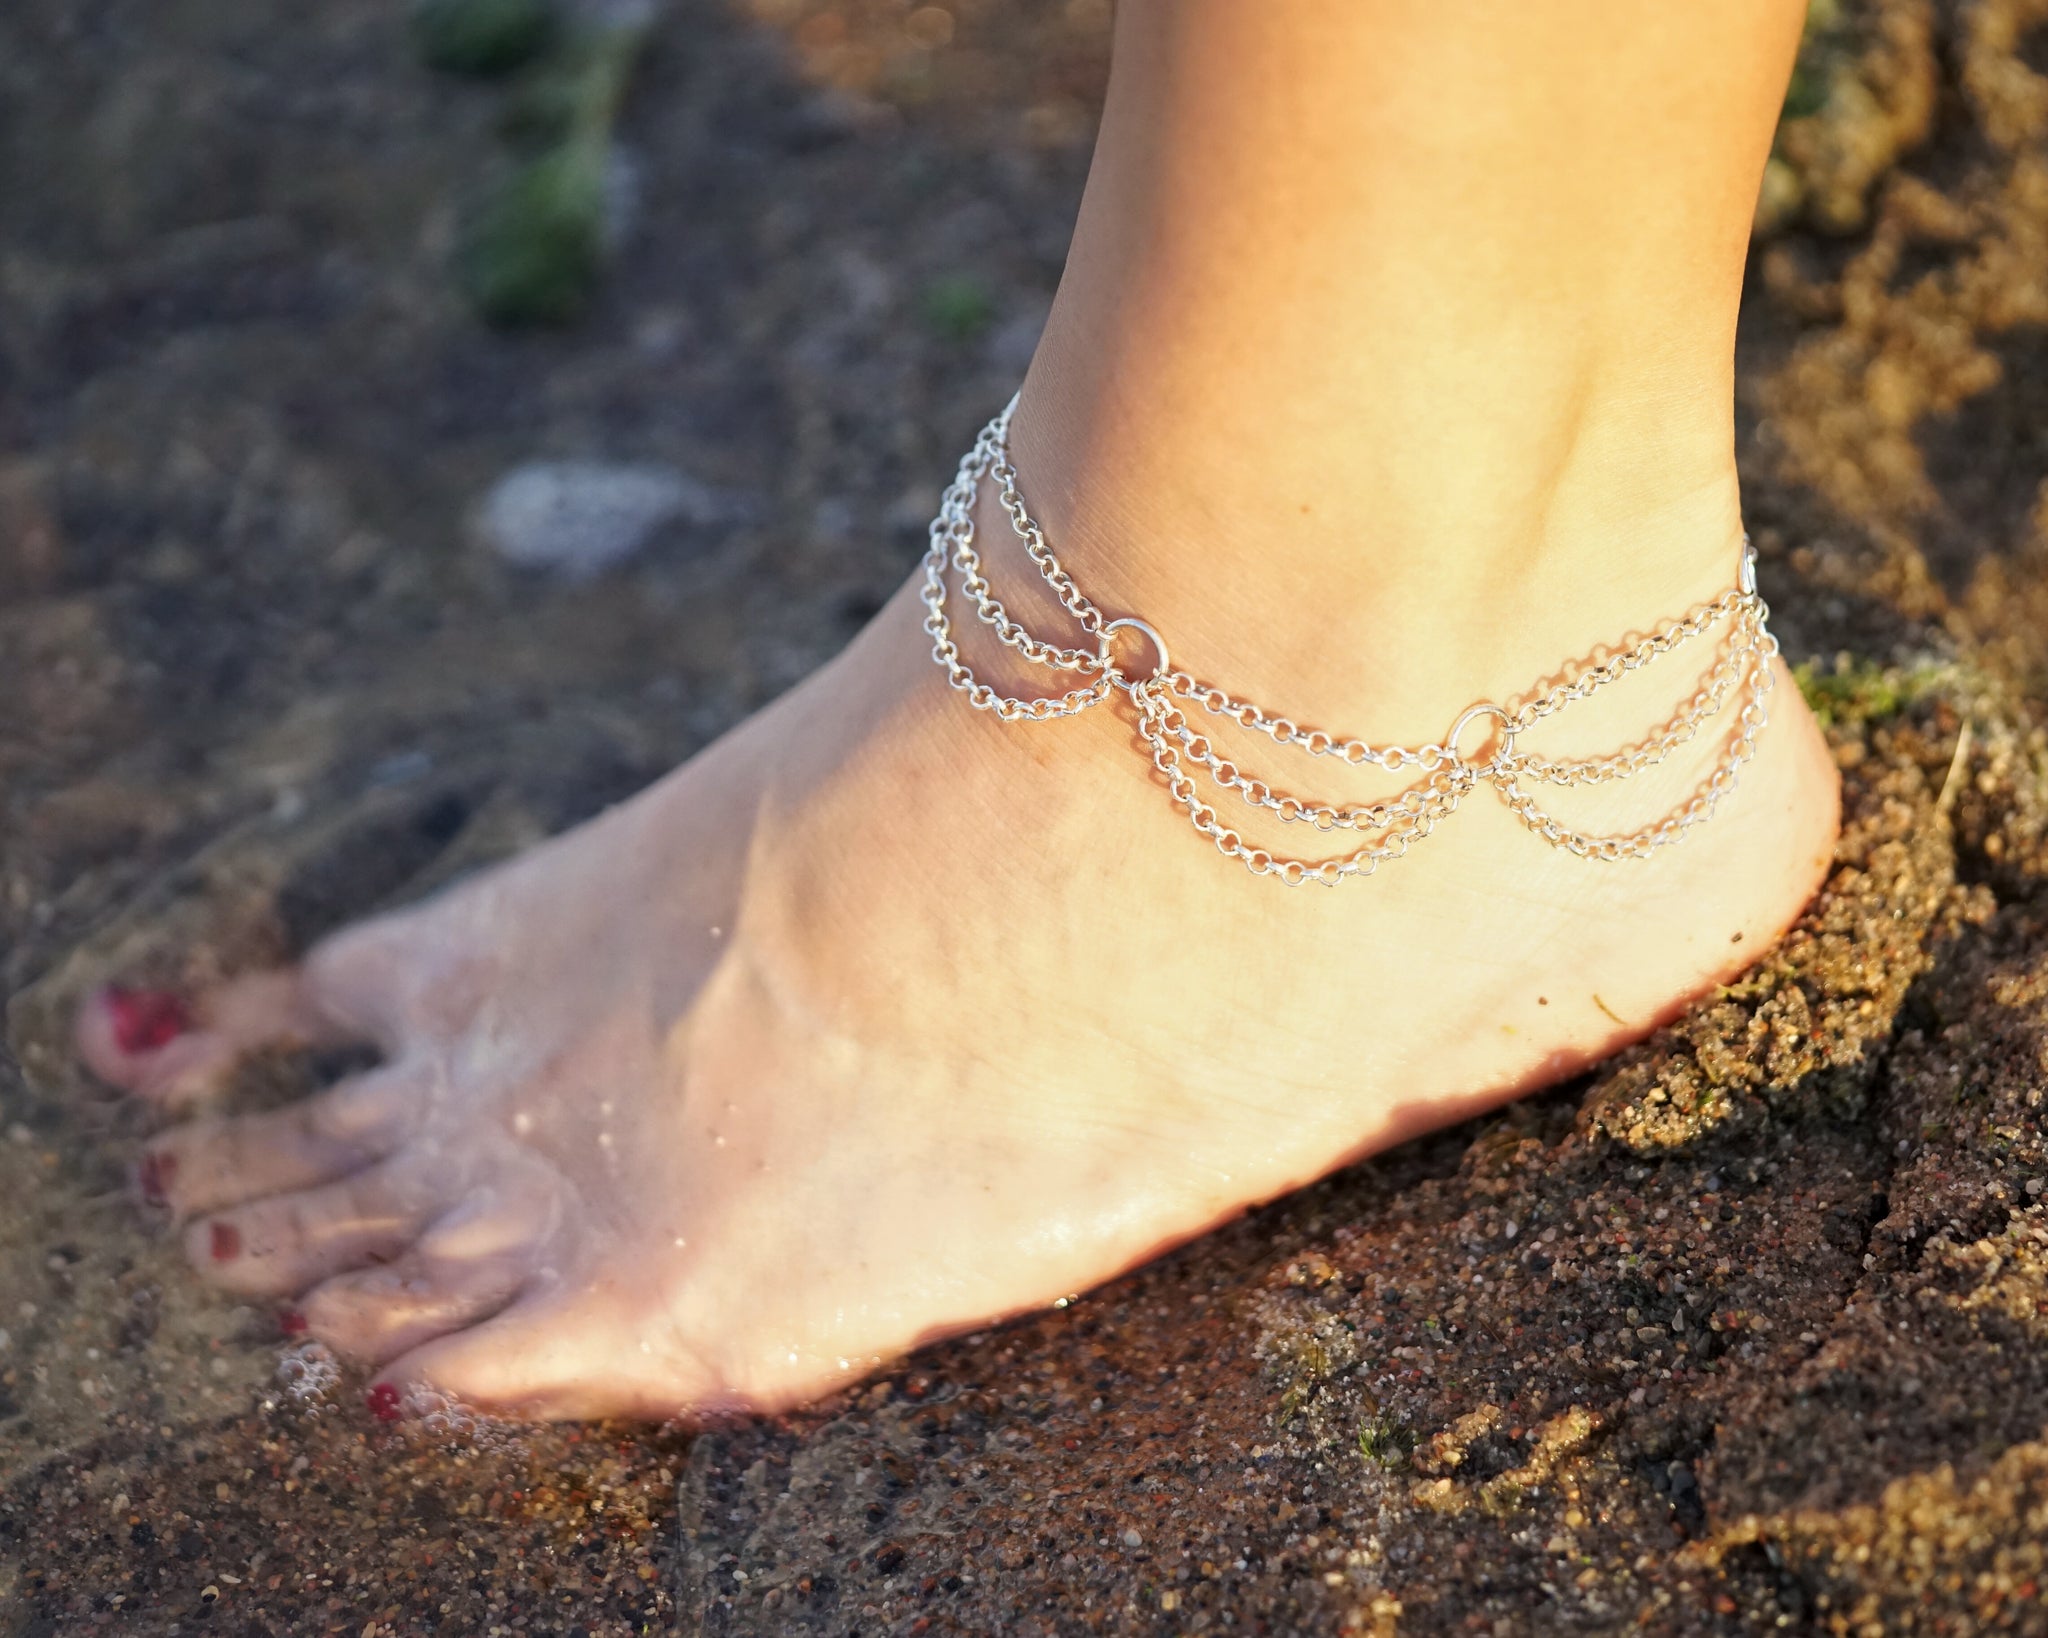 Draped Silver Anklet Summer Beach Festival Jewelry - DRAVYNMOOR